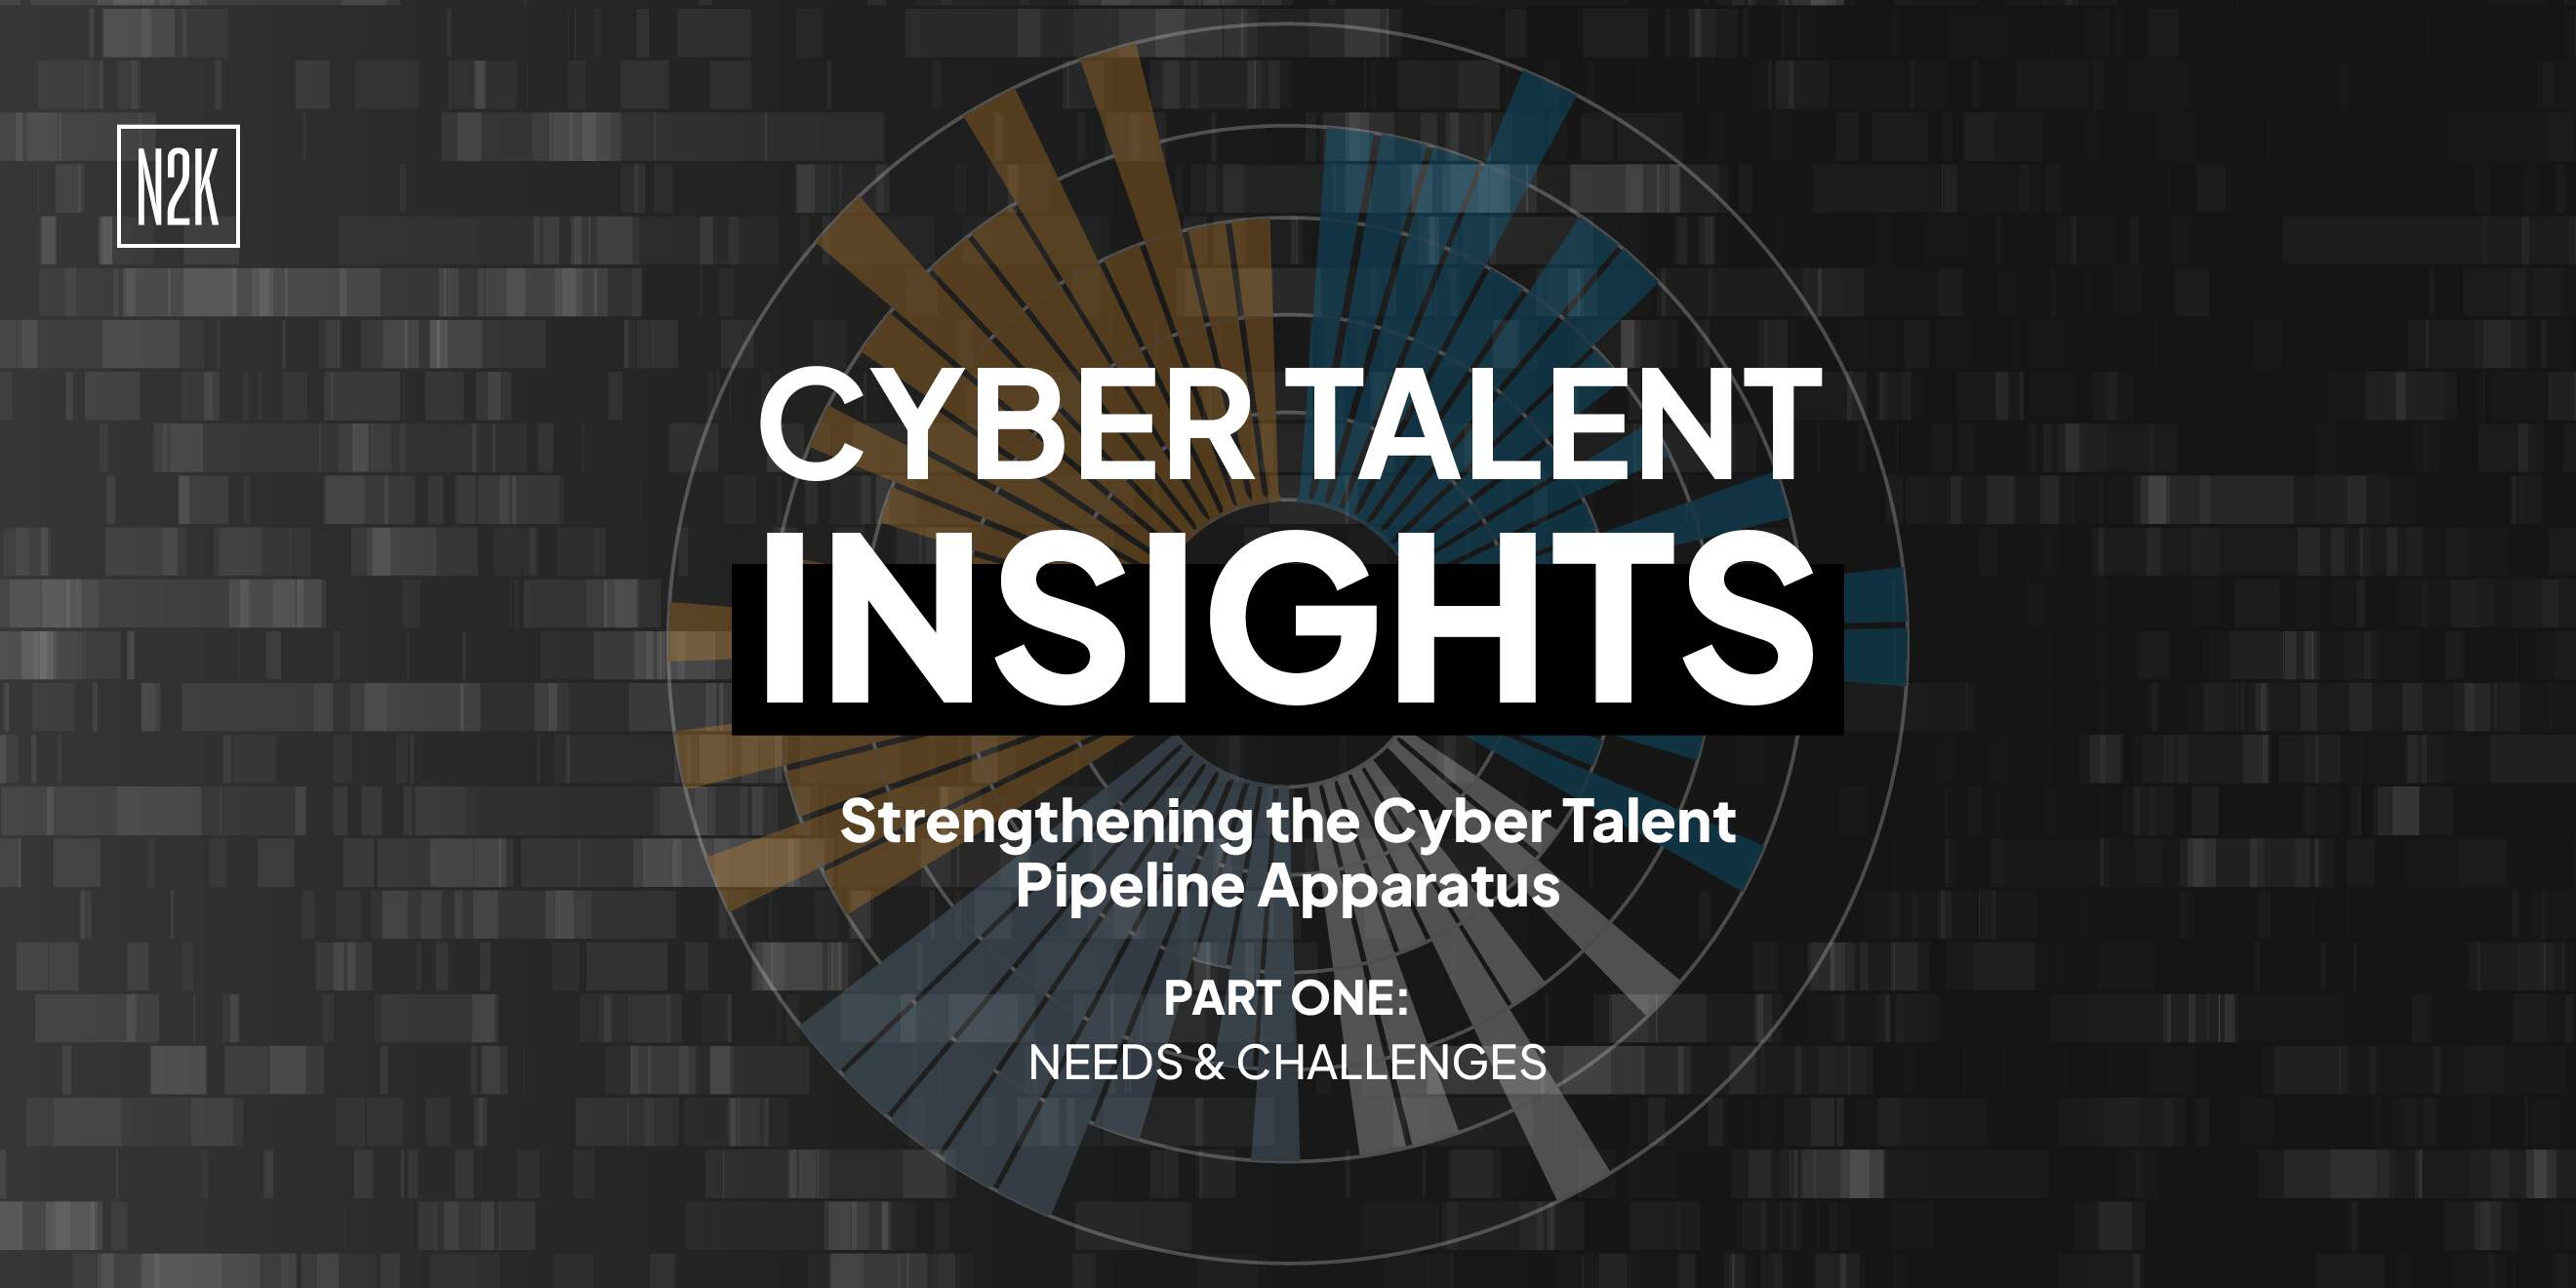 Strengthening the Cyber Talent Pipeline Apparatus Part I: Needs & Challenges